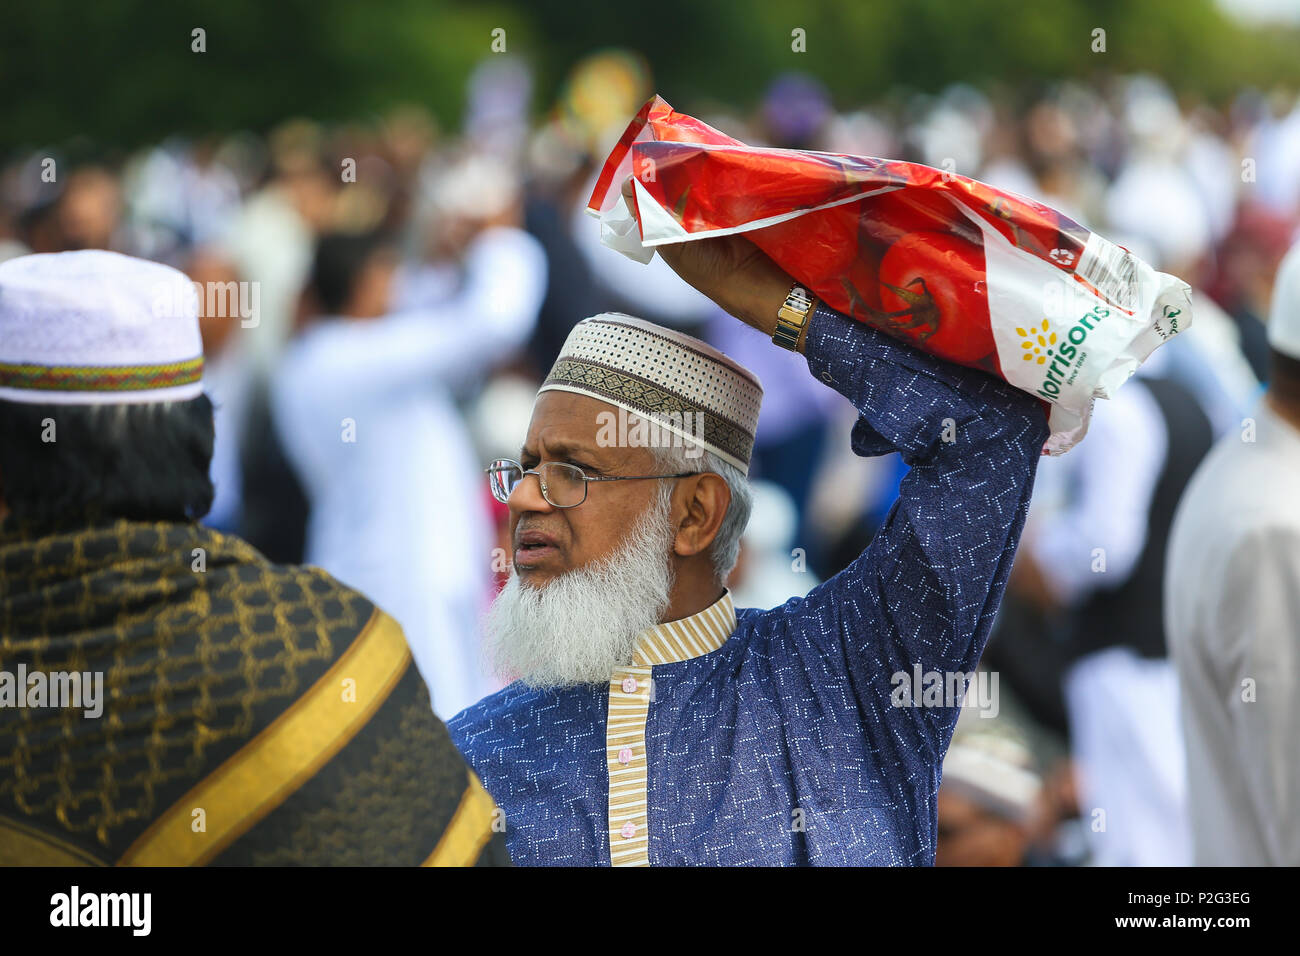 Birmingham, UK. 15th June, 2018. Over 100,000 muslims gather in Small Heath park, Birmingham, to pray on the morning of Eid, the end of the fasting month of Ramadan.Peter Lopeman/Alamy Live News Stock Photo